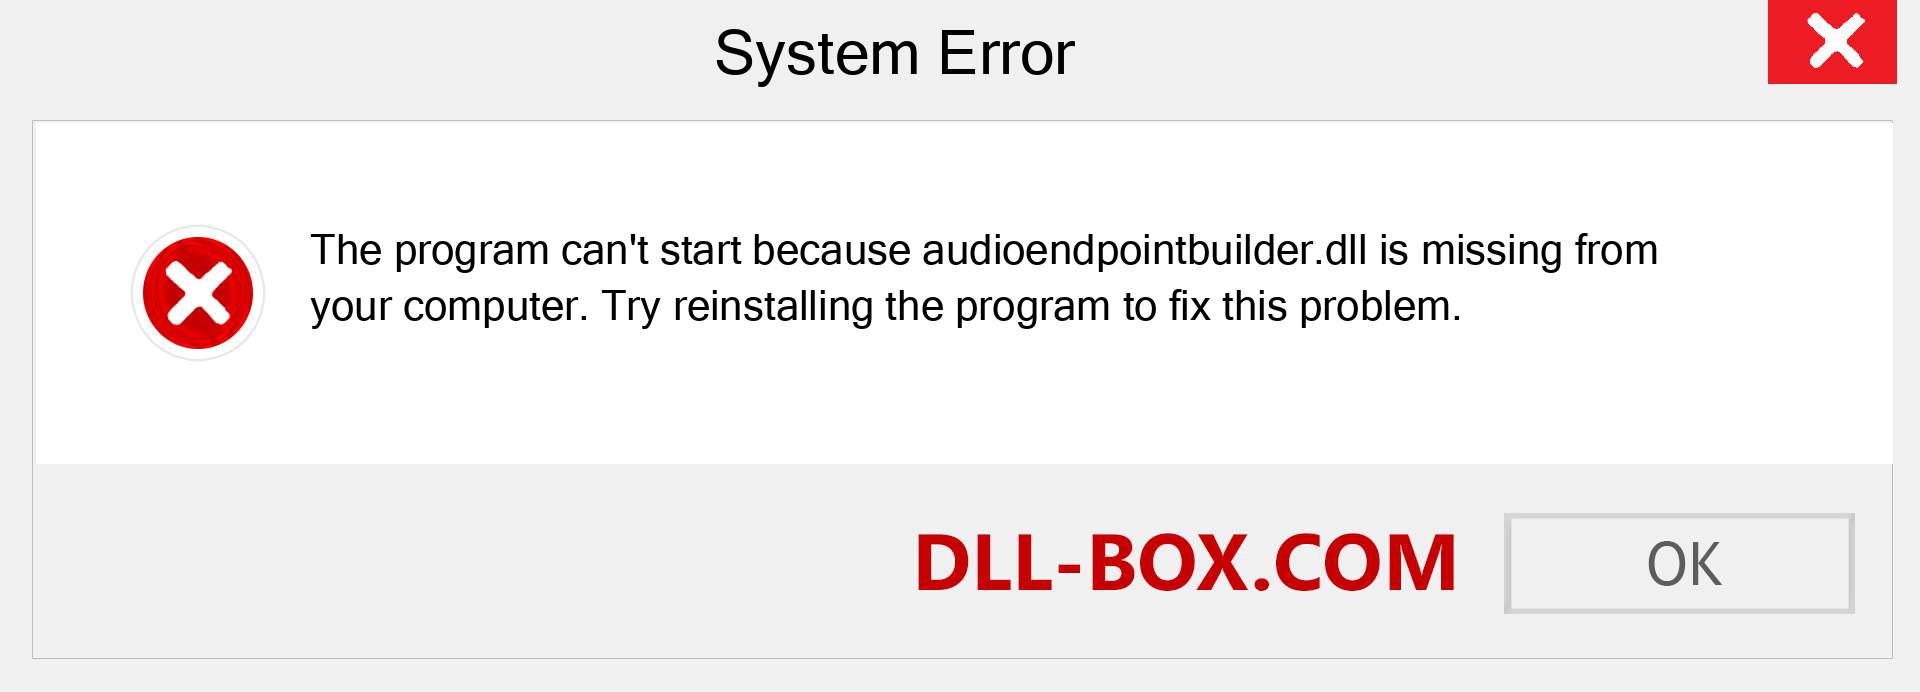  audioendpointbuilder.dll file is missing?. Download for Windows 7, 8, 10 - Fix  audioendpointbuilder dll Missing Error on Windows, photos, images